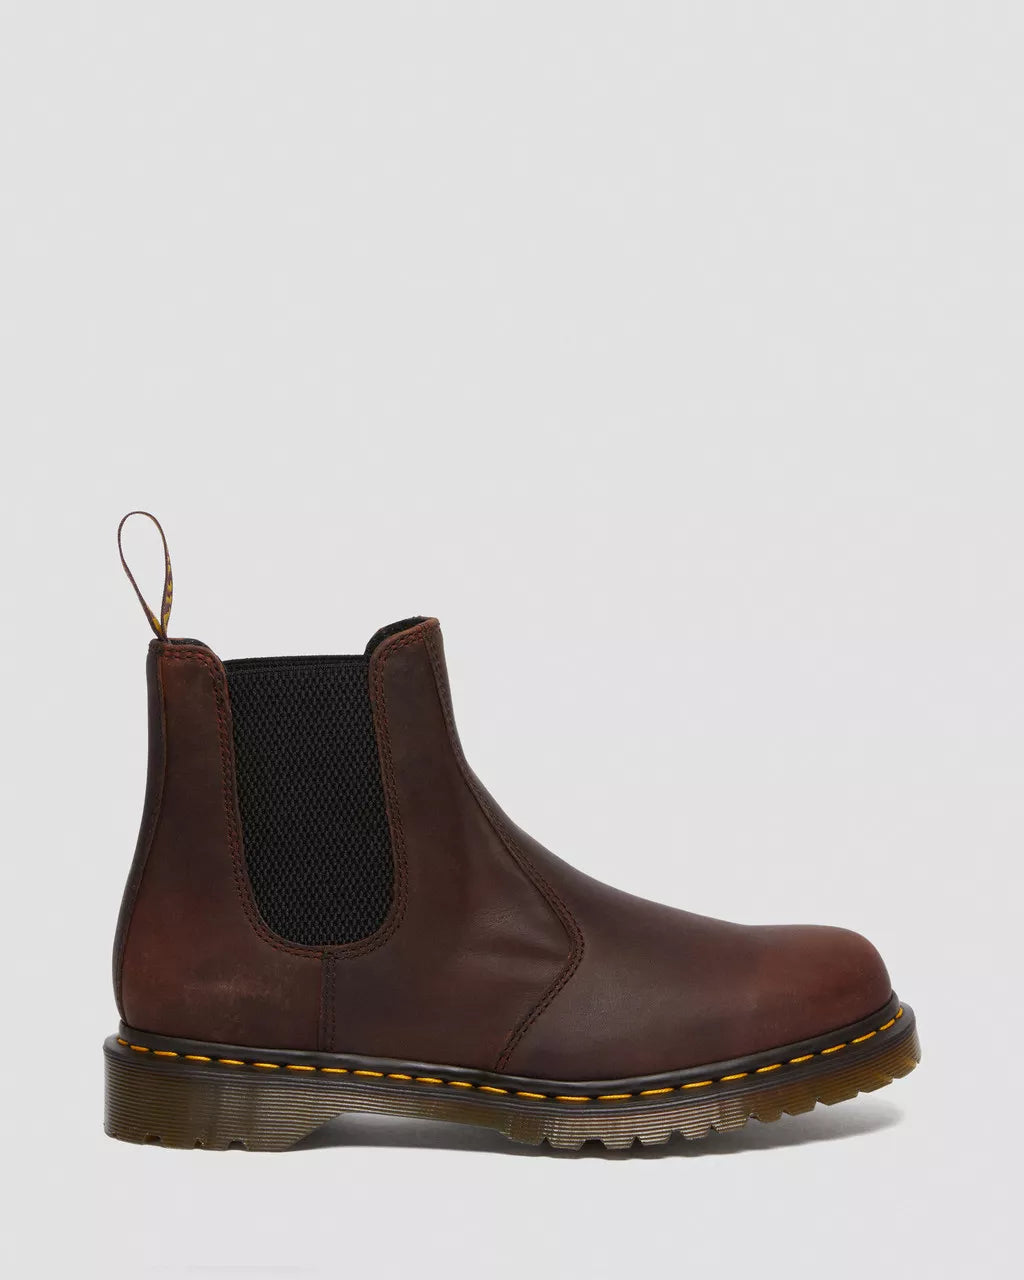 DR MARTENS 2976 WAXED FULL GRAIN LEATHER CHELSEA BOOTS - CHESTNUT BROWN